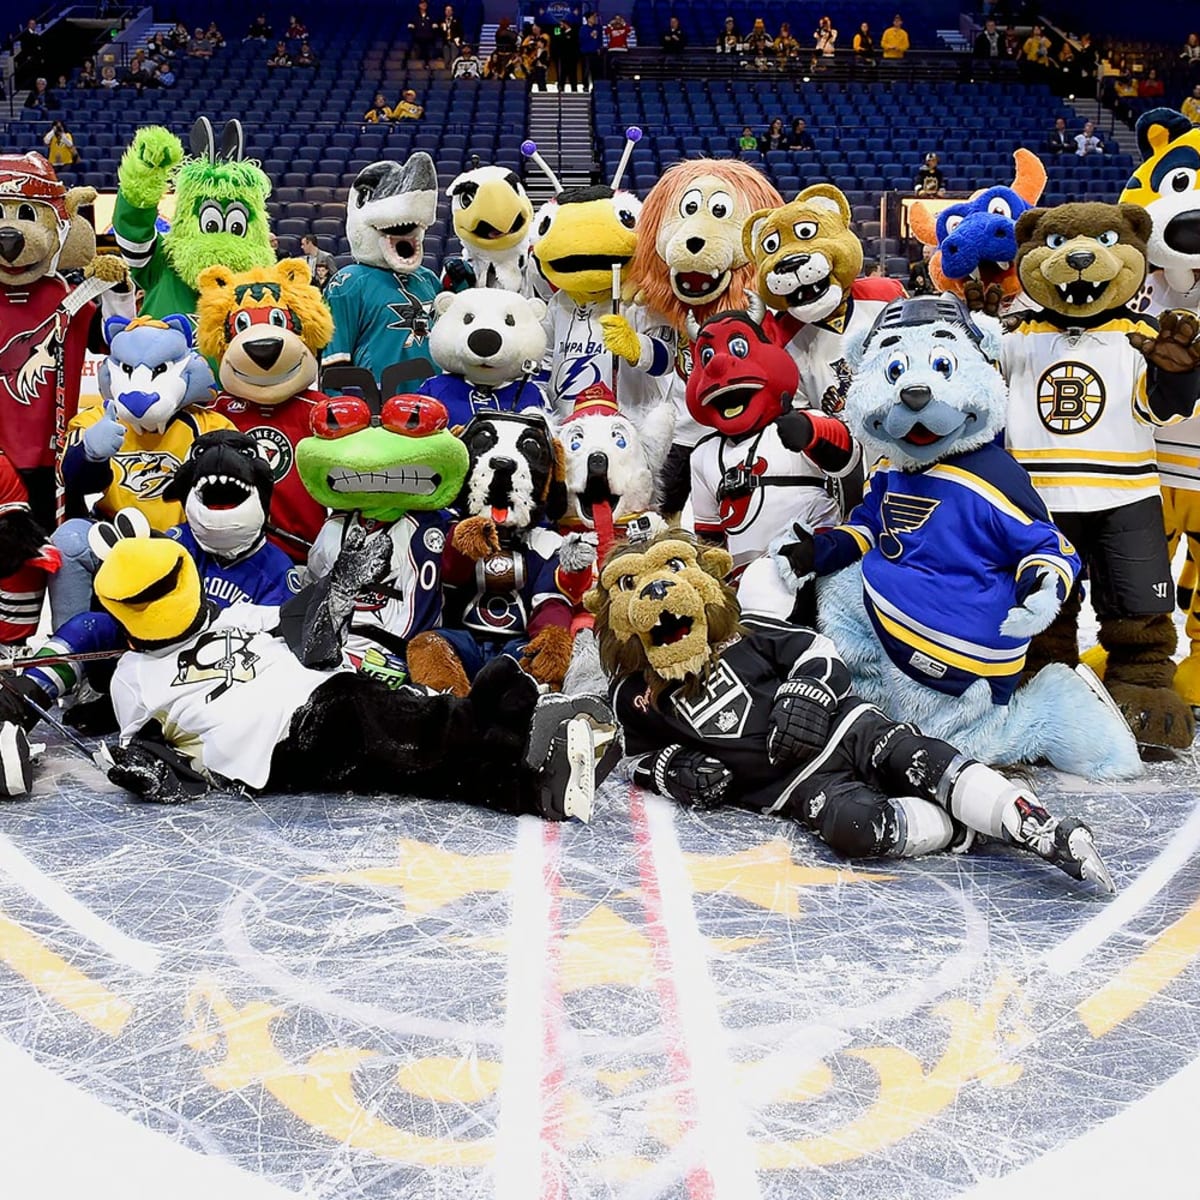 Lions, Tigers, and Bears; Oh My! Ranking Each NHL Team's Mascots